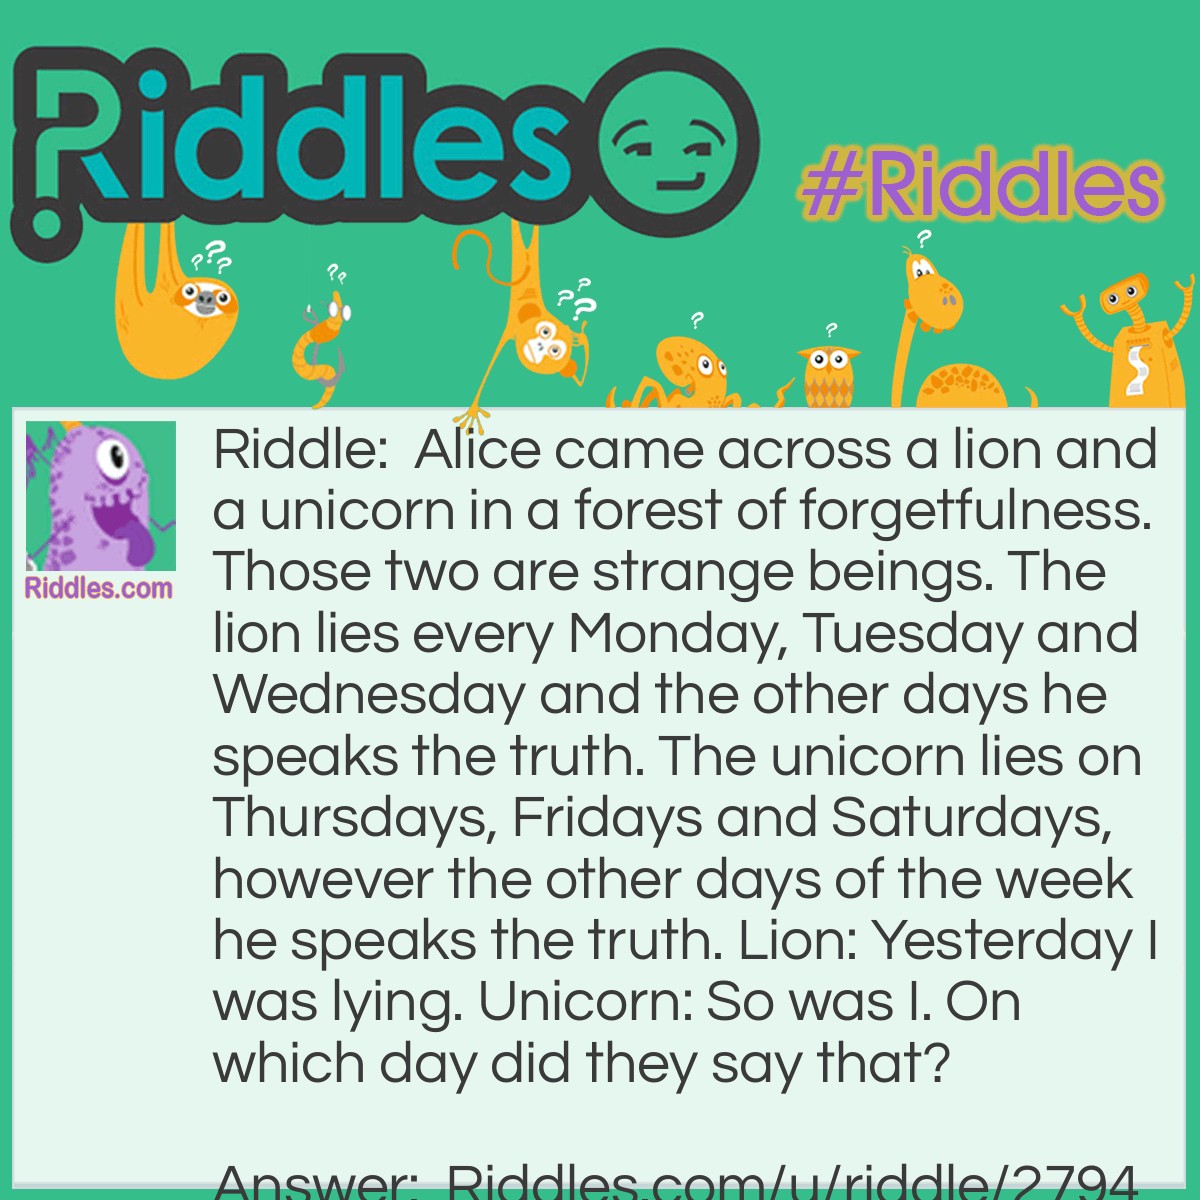 Riddle: Alice came across a lion and a unicorn in a forest of forgetfulness. Those two are strange beings. The lion lies every Monday, Tuesday and Wednesday and the other days he speaks the truth. The unicorn lies on Thursdays, Fridays and Saturdays, however the other days of the week he speaks the truth. Lion: Yesterday I was lying. Unicorn: So was I. On which day did they say that? Answer: As there is no day when both of the beings would be lying, at least one of them must have spoken the truth. They both speak the truth only on Sunday. However, the Lion would then be lying in his statement, so it couldn't be said on Sunday. So exactly one of them lied. If the Unicorn was honest, then it would have to be Sunday - but previously we proved this wrong. Thus only the Lion spoke the truth when he met Alice on Thursday and spoke with the Unicorn about Wednesday.